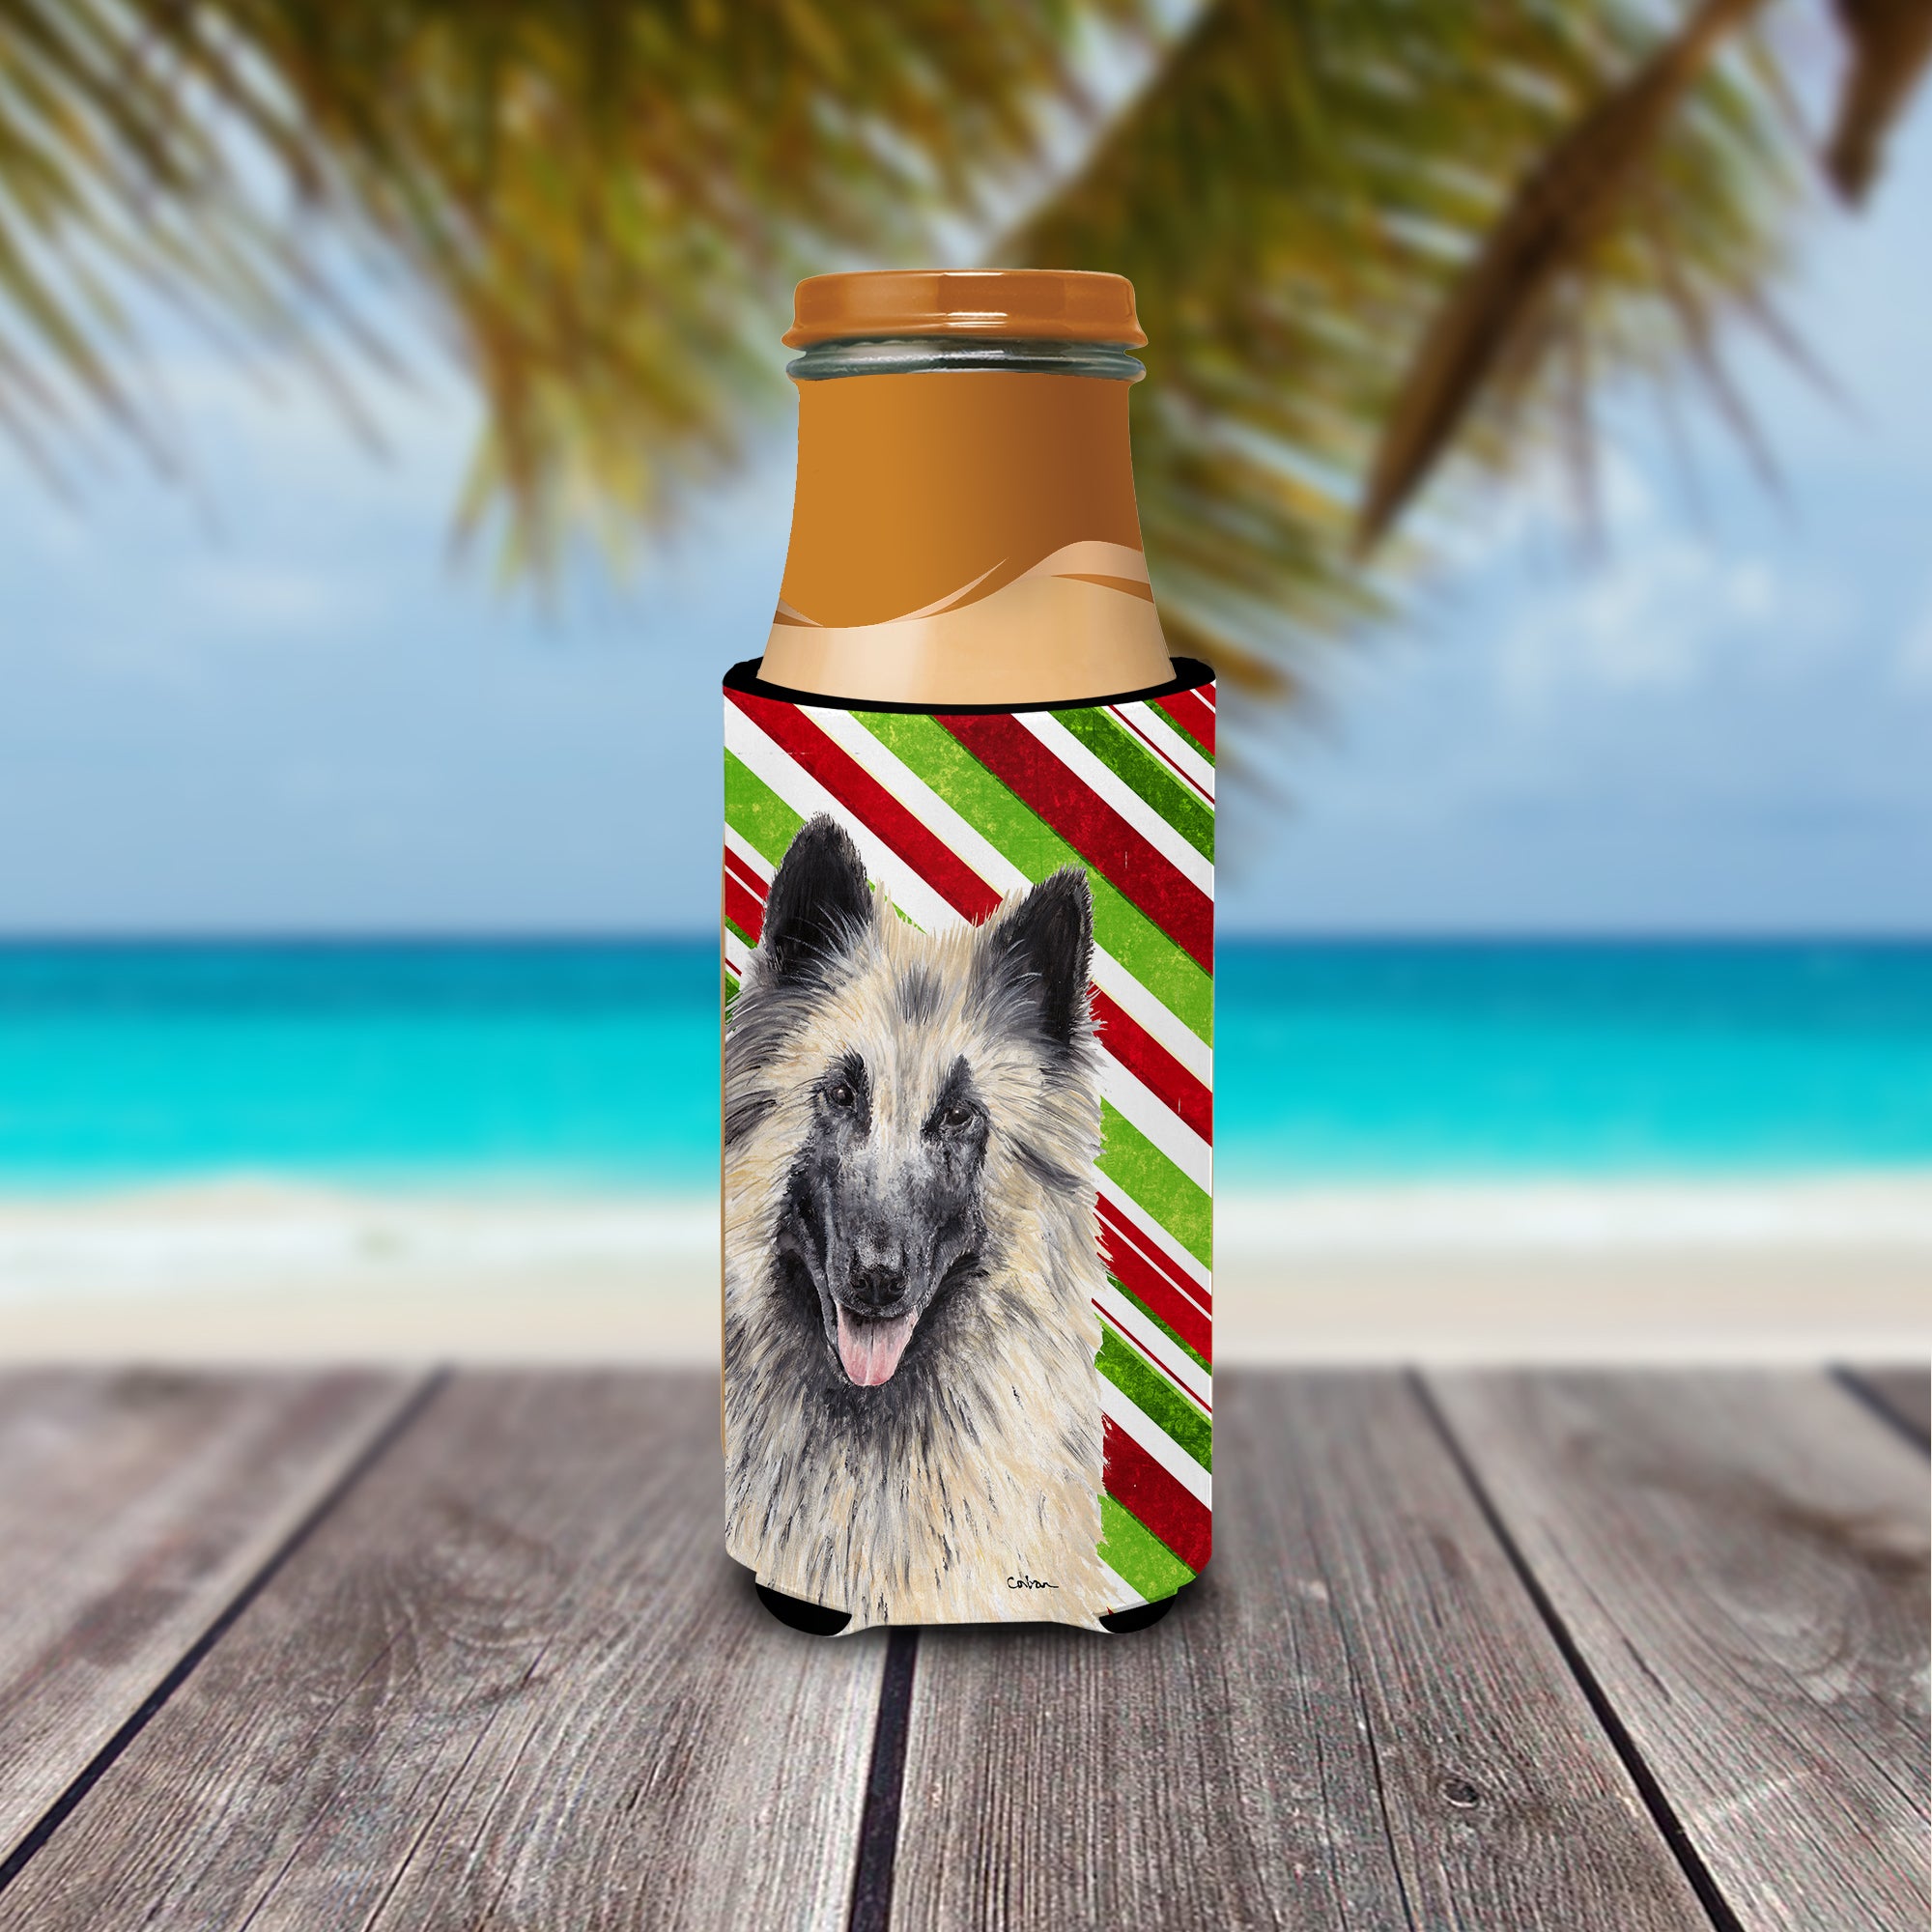 Belgian Tervuren Candy Cane Holiday Christmas Ultra Beverage Insulators for slim cans SC9352MUK